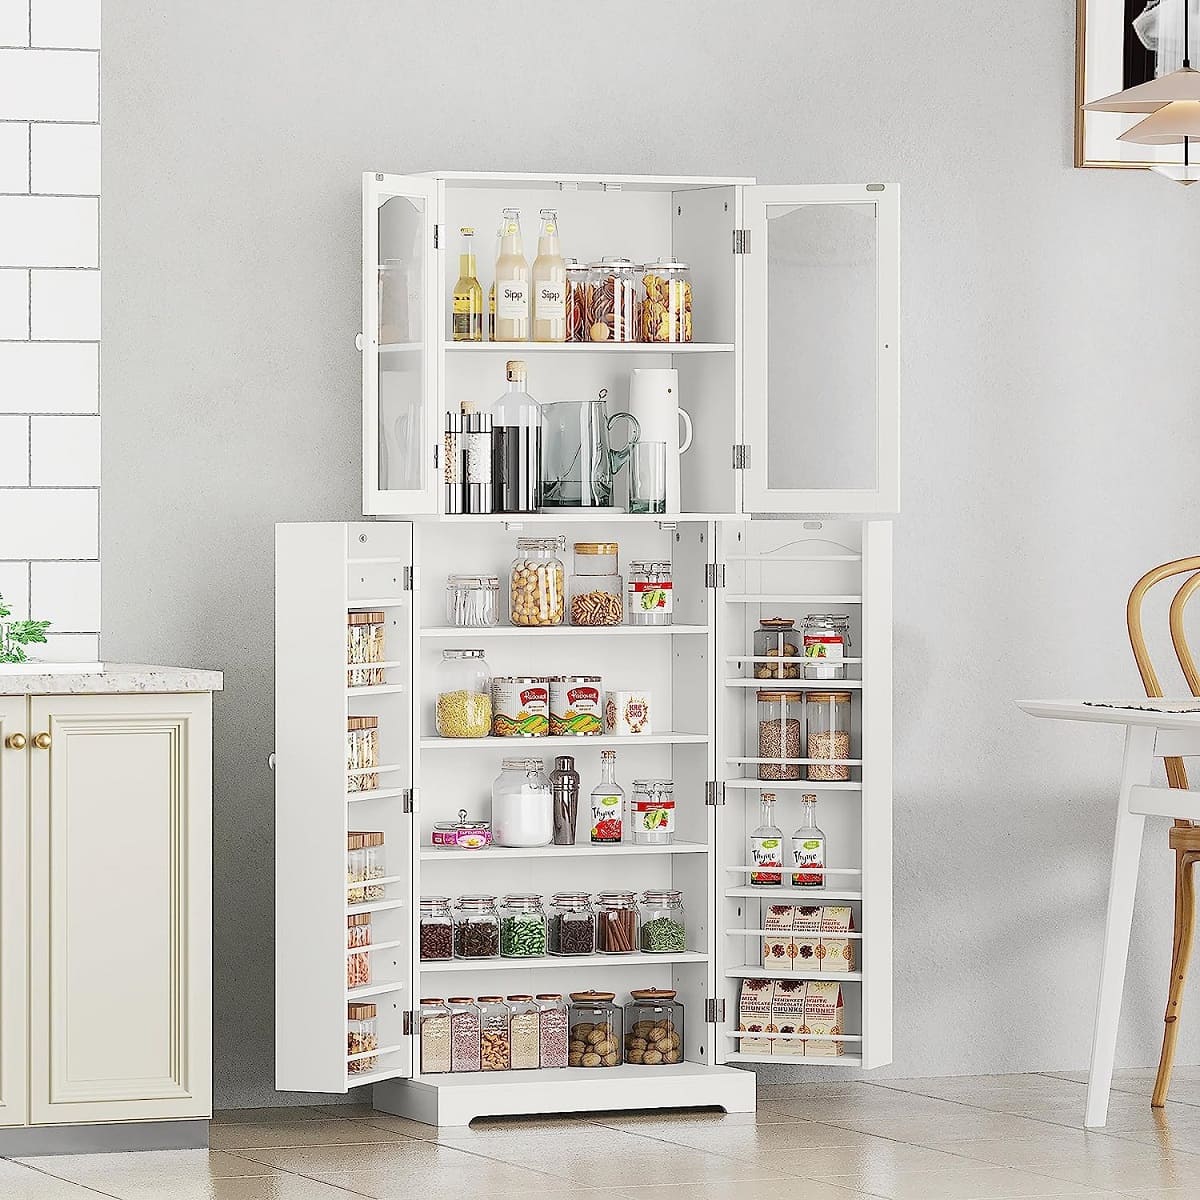 How To Build A Freestanding Food Pantry Cabinet